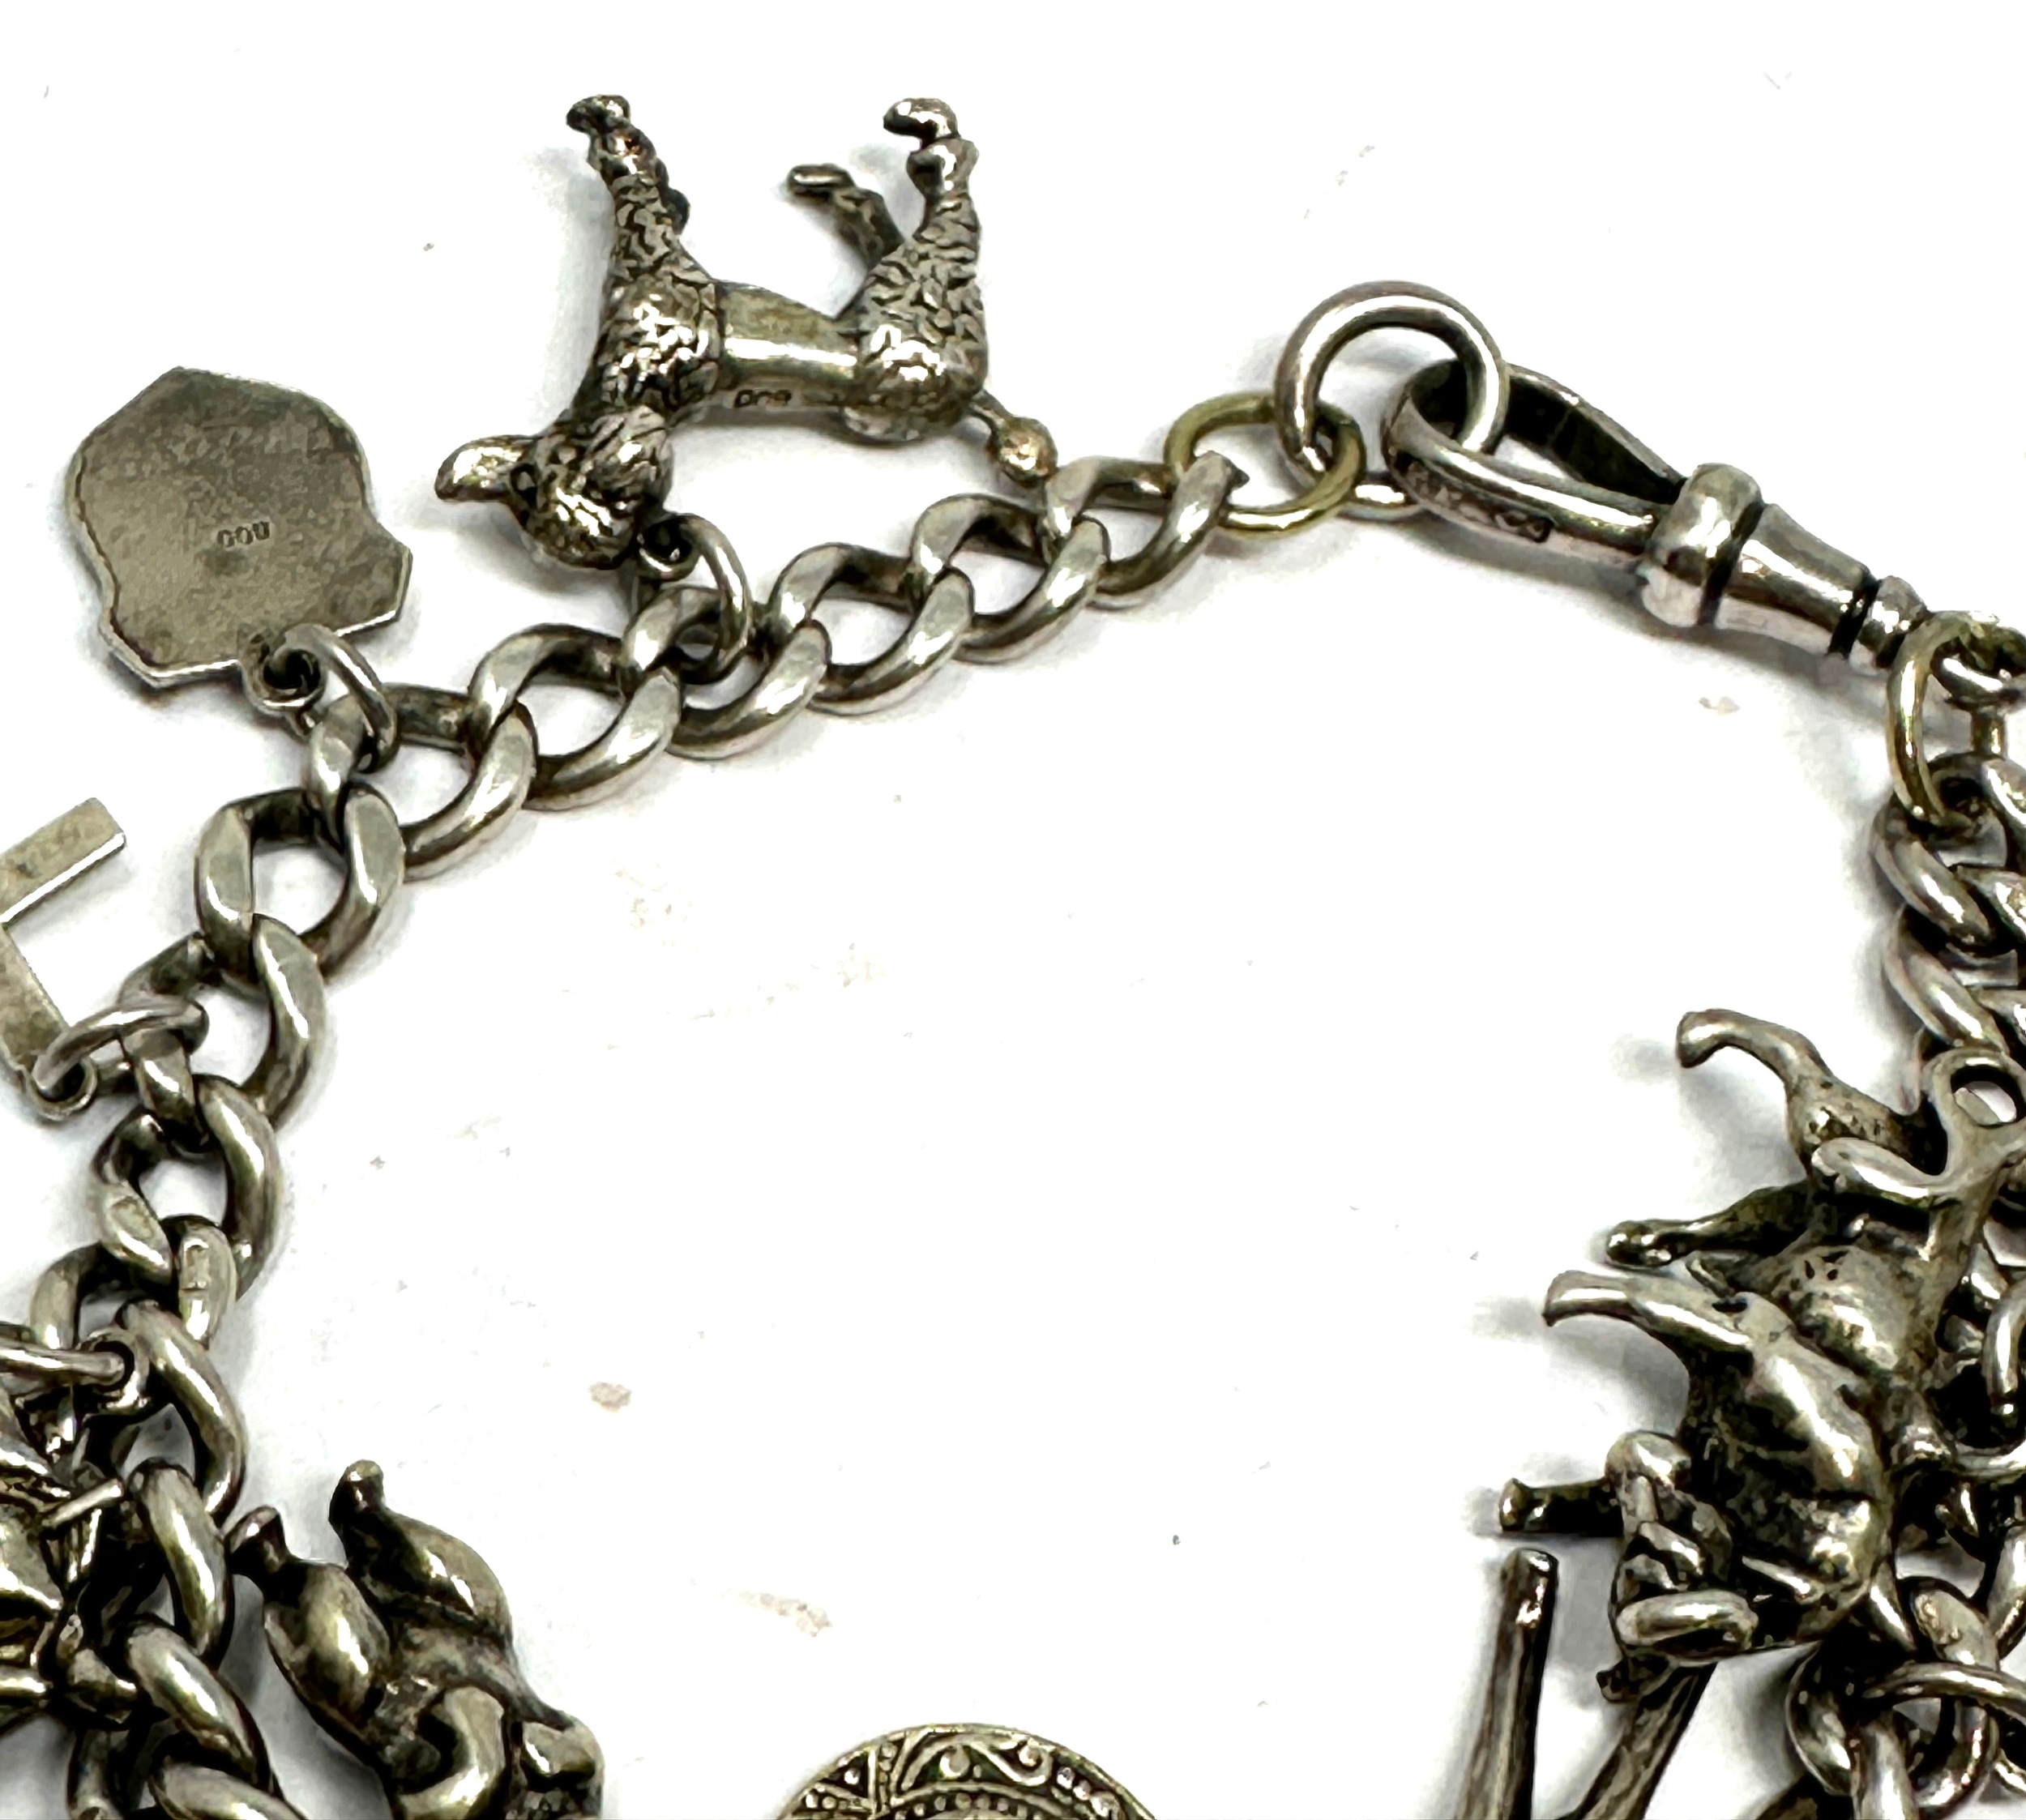 Vintage silver watch chain charm bracelet weight 50g - Image 4 of 4